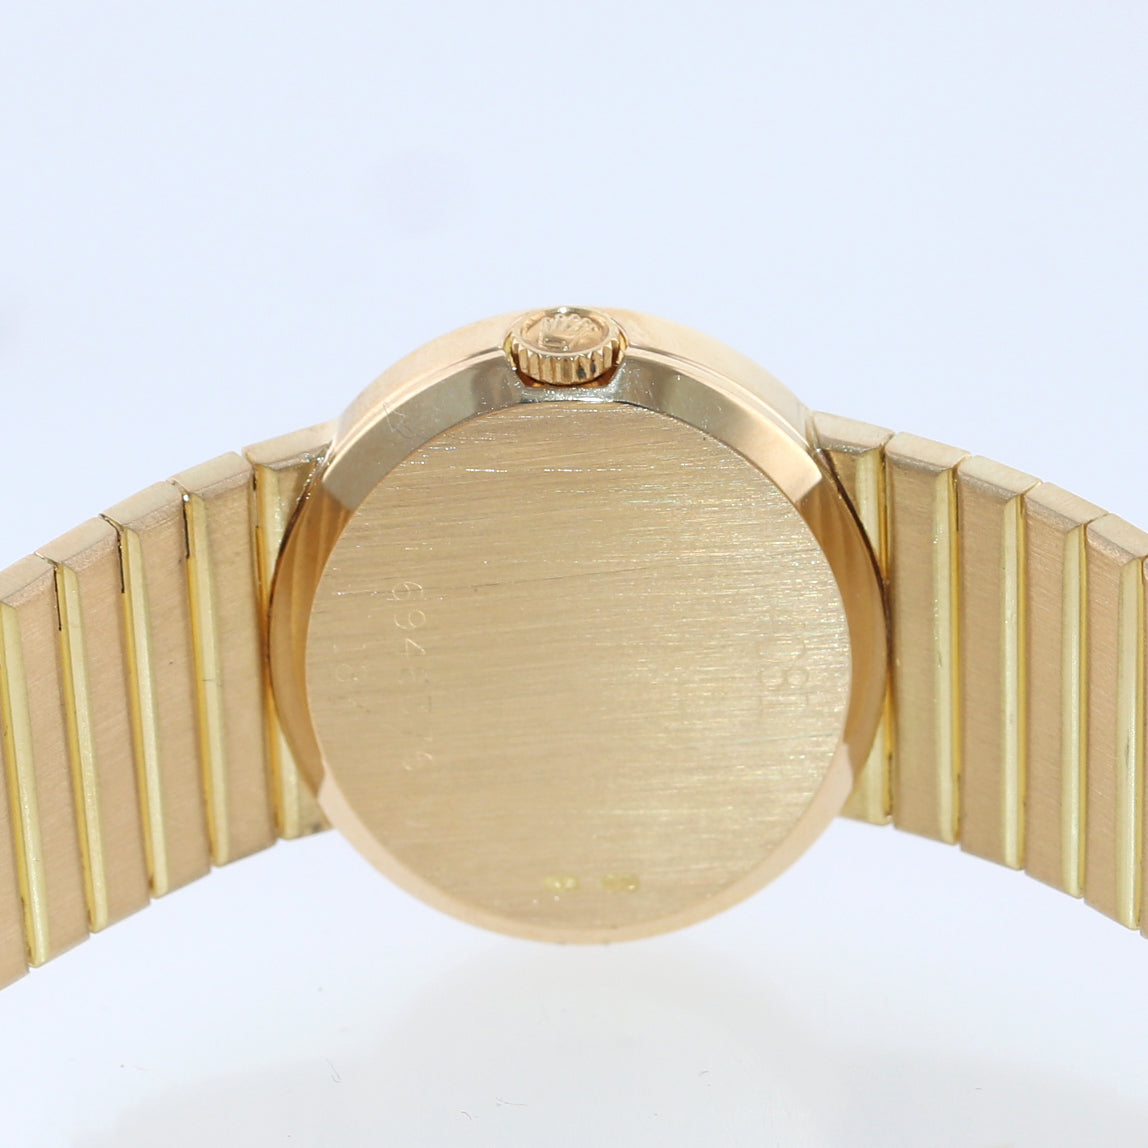 Ladies PAPERS VTG Rolex Cellini 4081 18k Yellow Gold 25mm Diamond Manual Watch